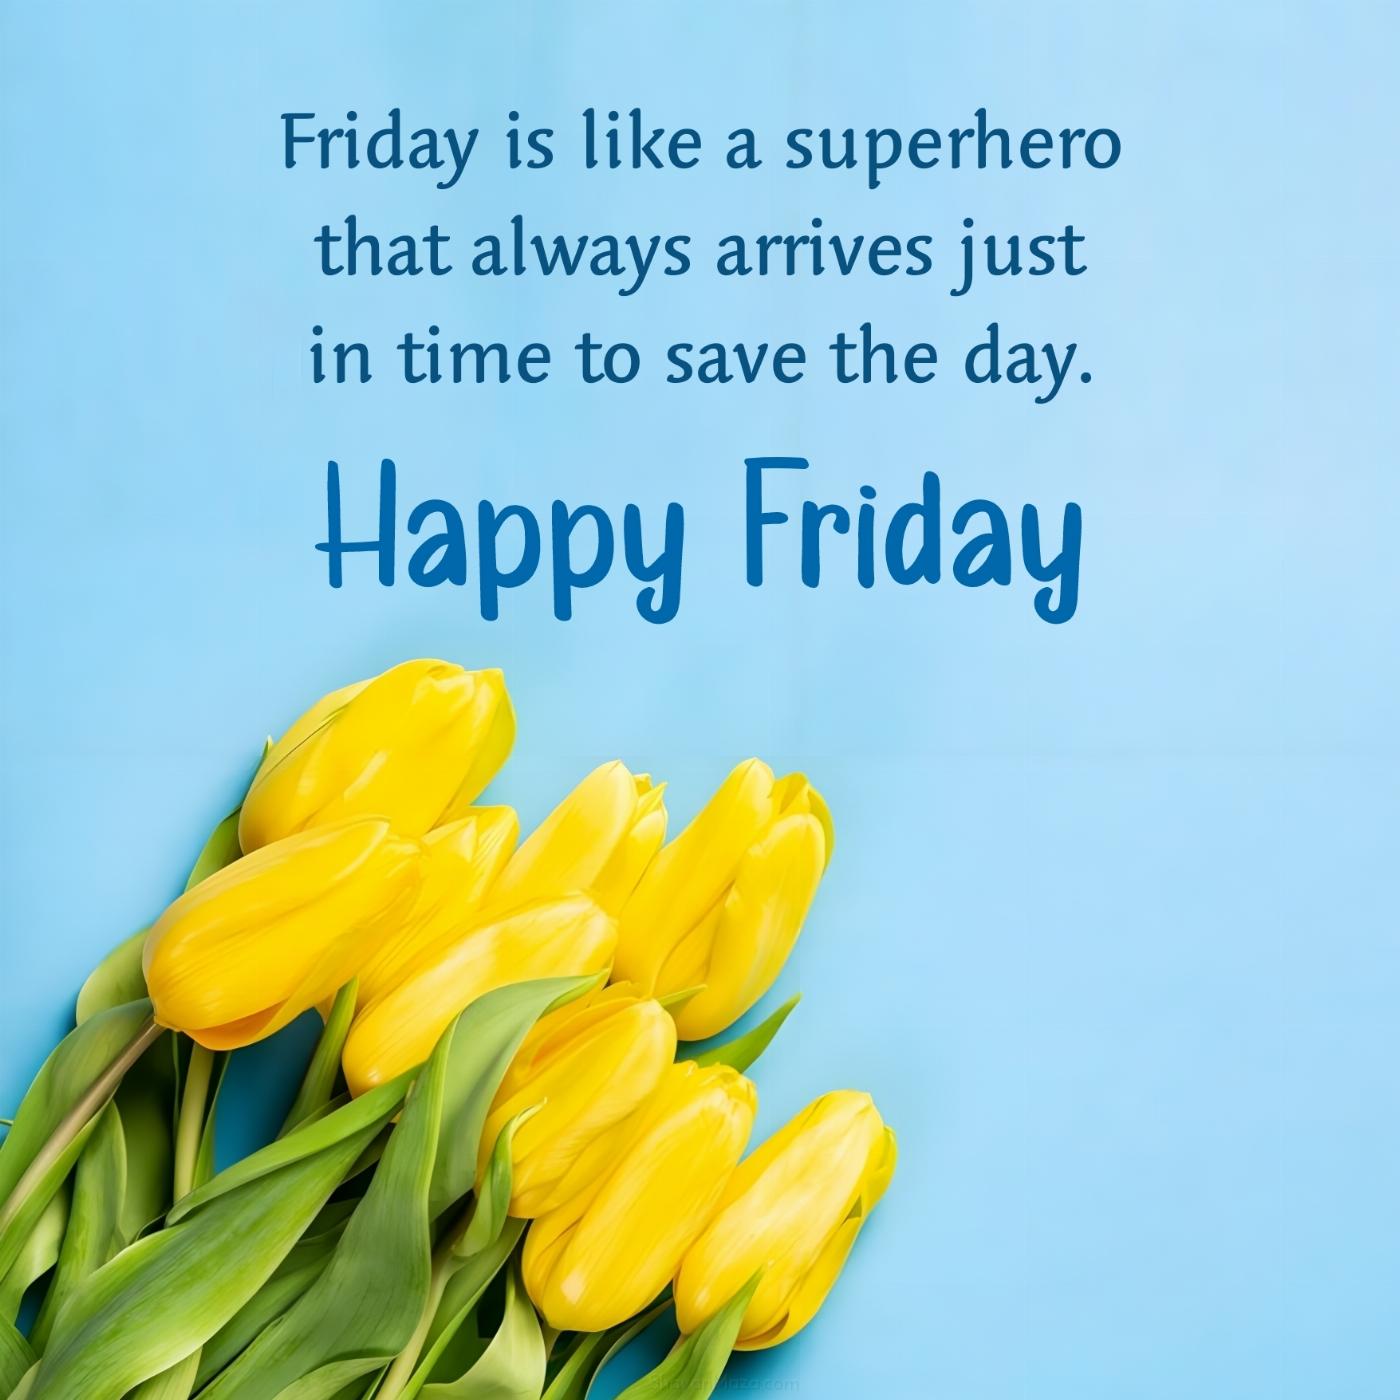 Friday is like a superhero that always arrives just in time